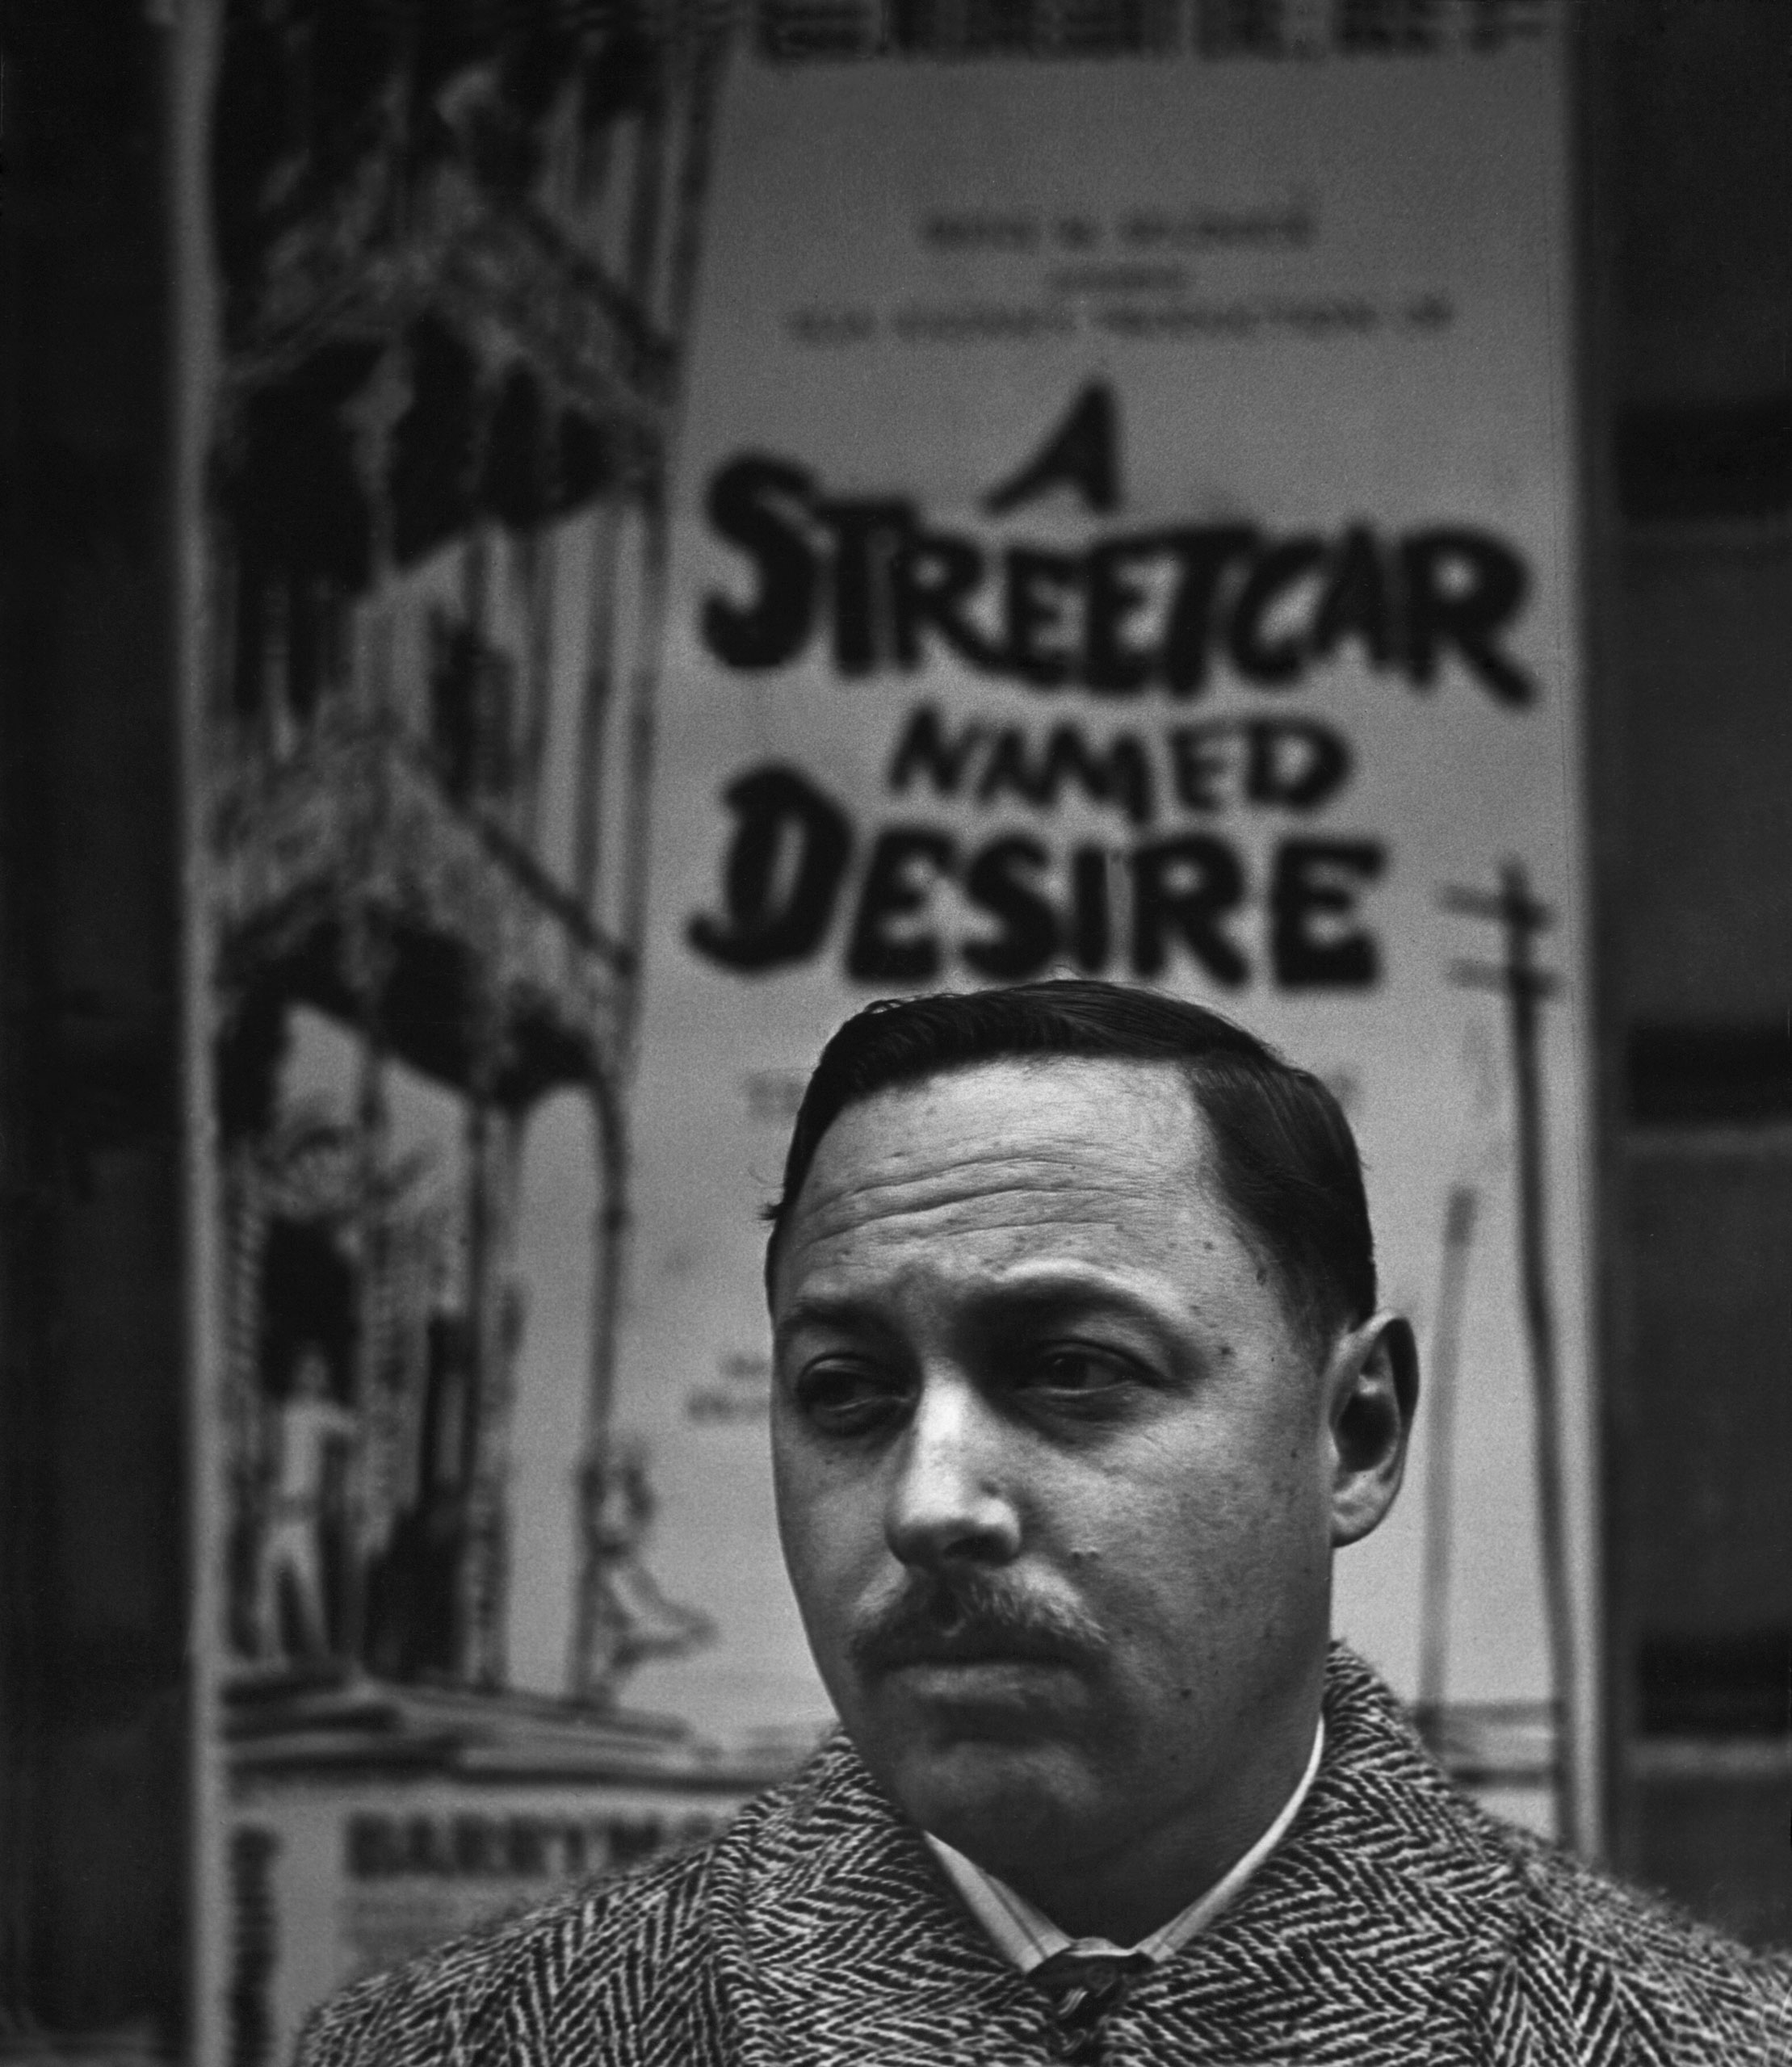 Tennessee Williams stands in front of a poster advertising his play, A Streetcar Named Desire, in New York in 1948.